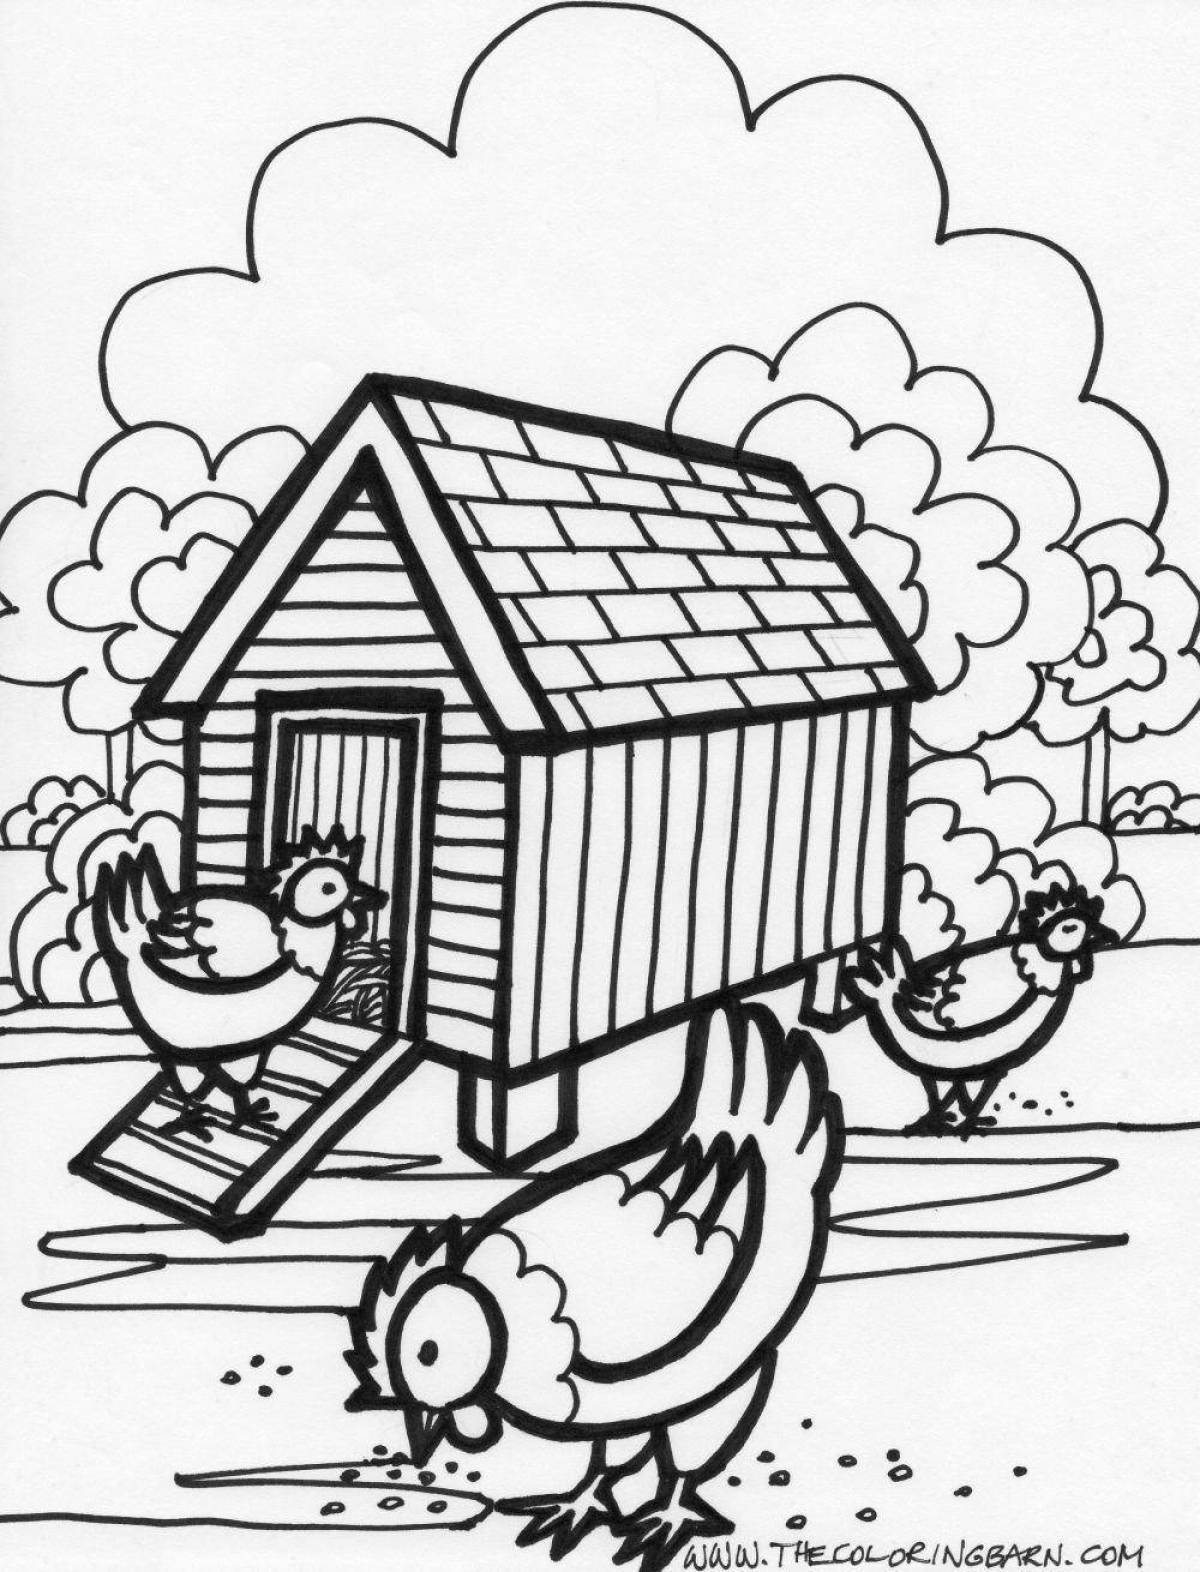 Coloring page dazzling chicken coop for kids